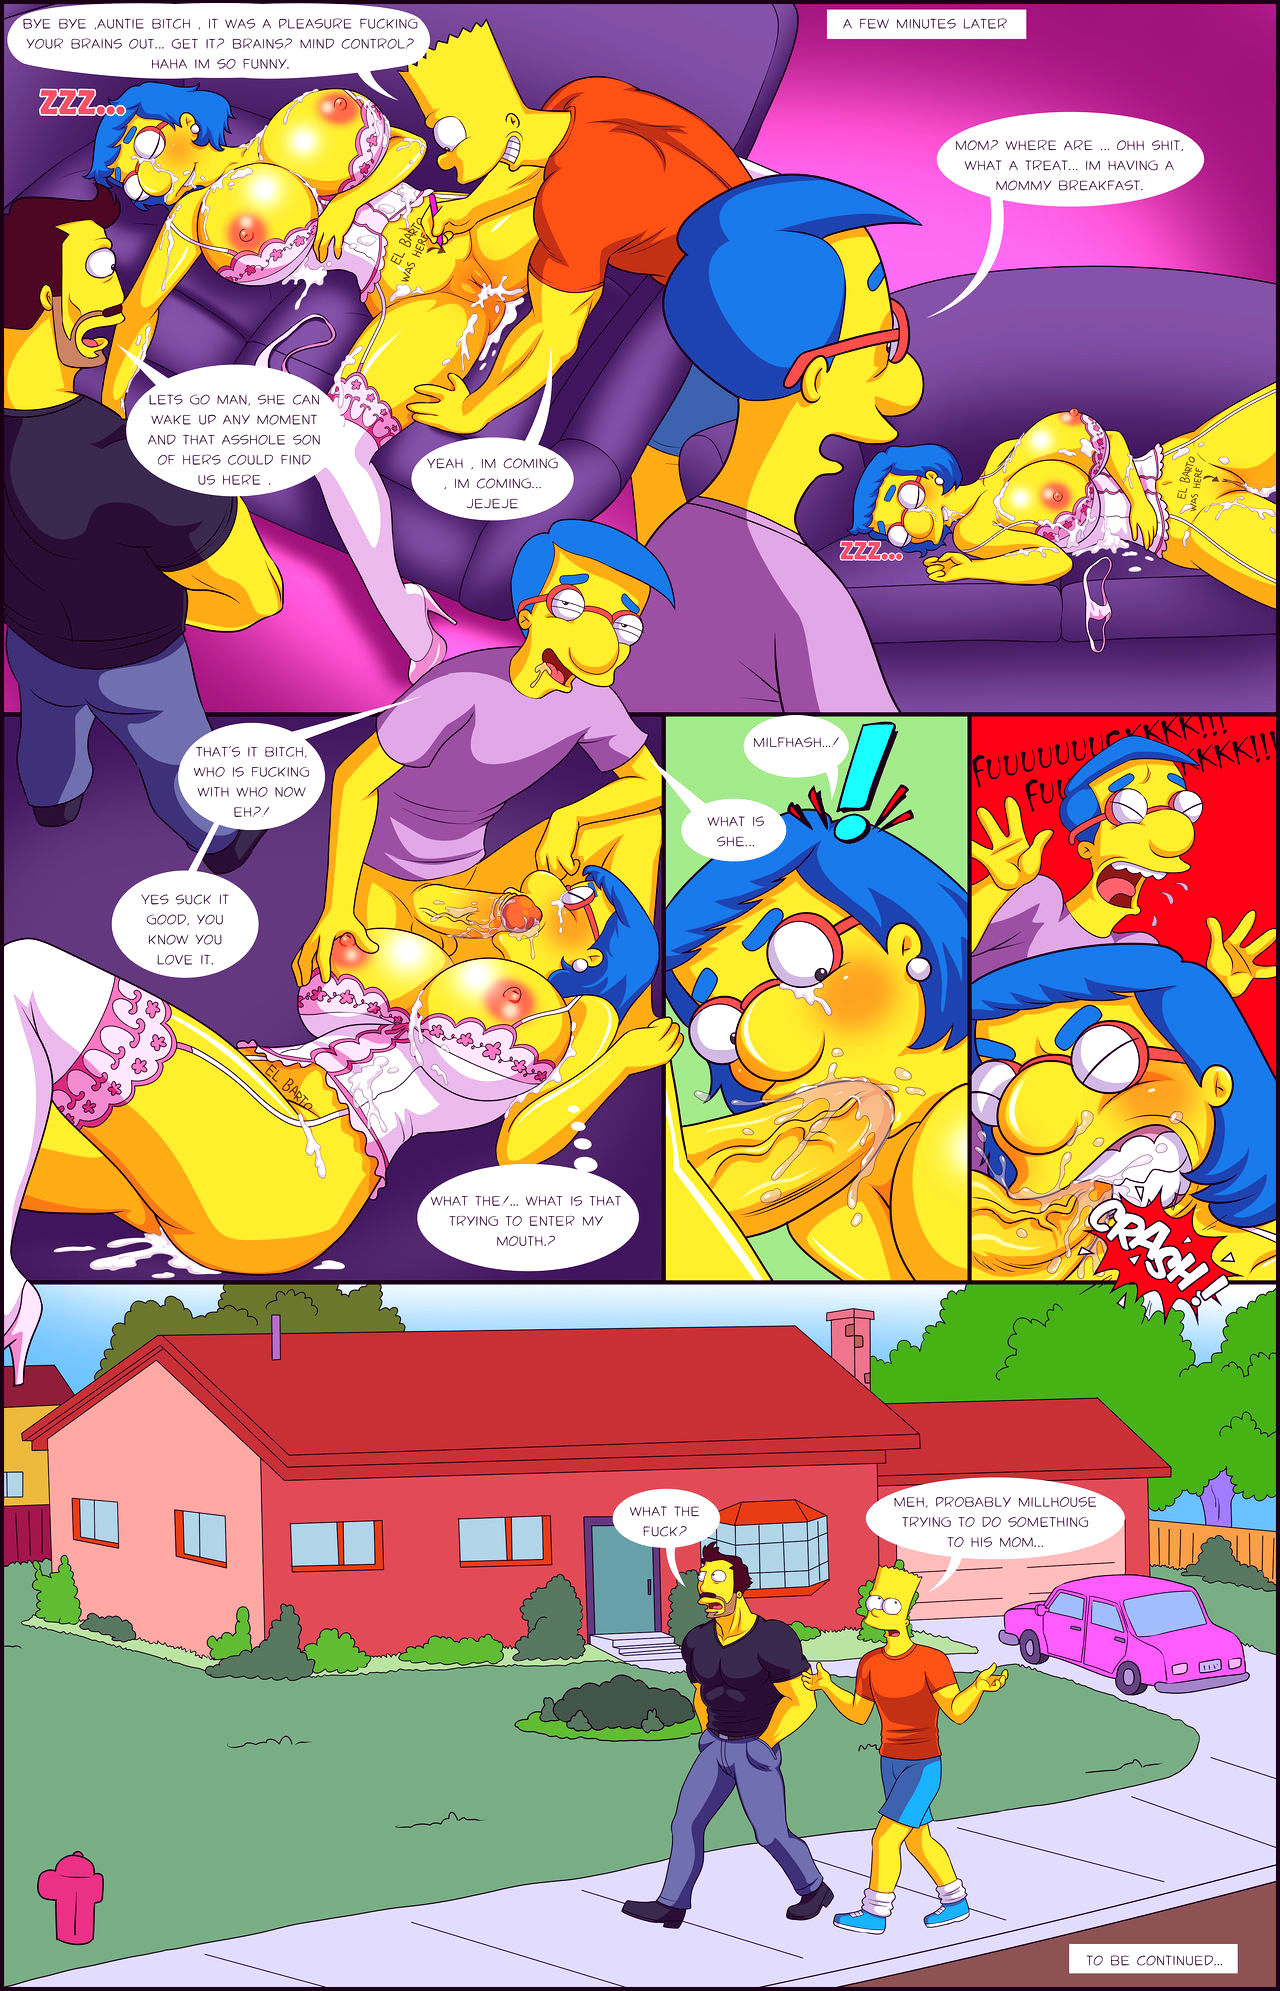 Darrens adventure or welcome to springfield porn comic picture 21